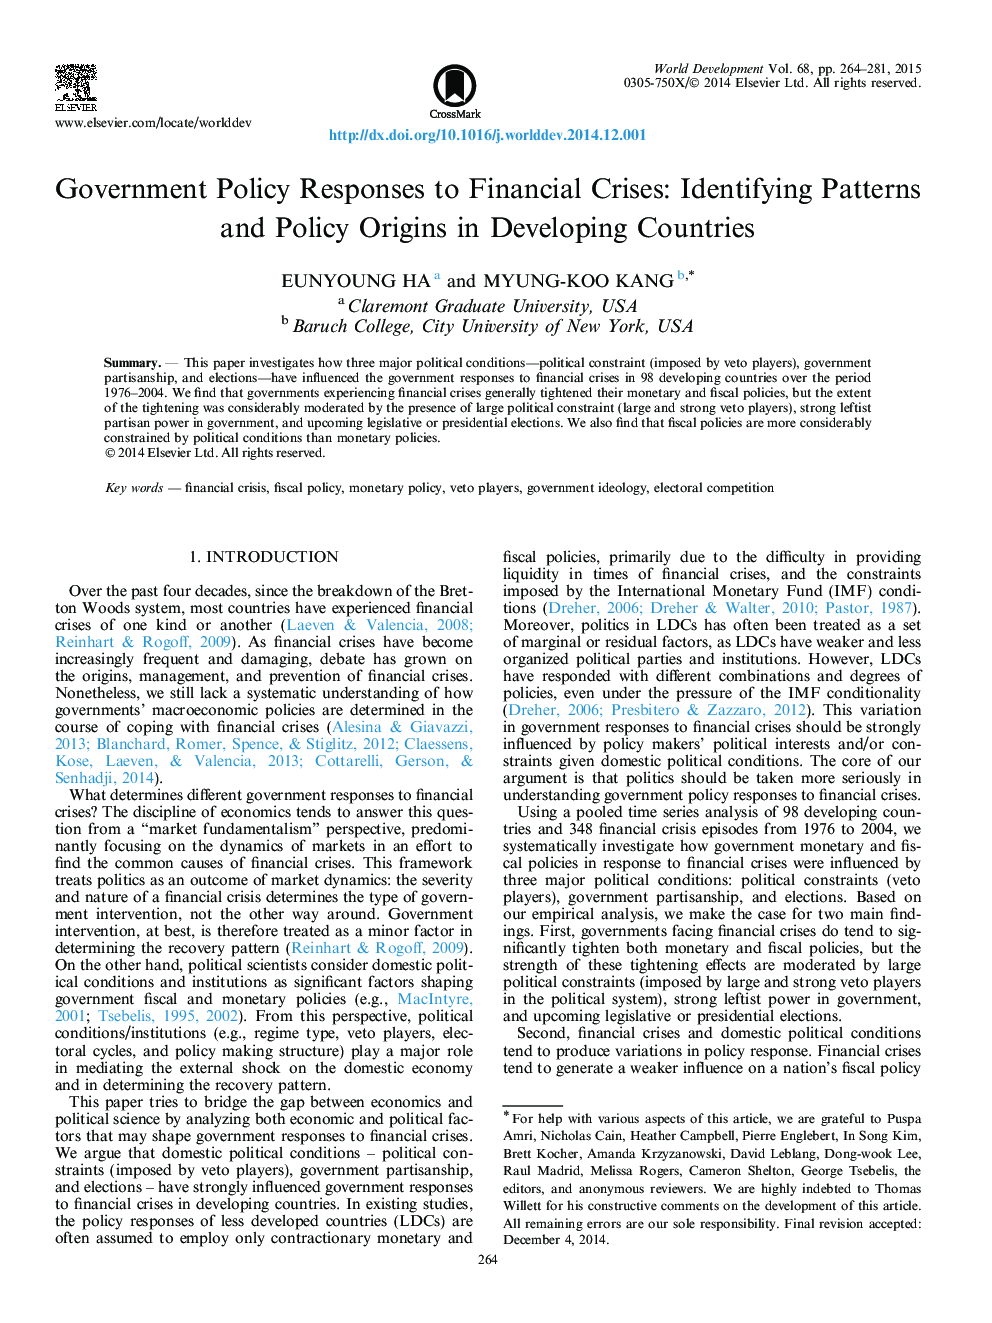 Government Policy Responses to Financial Crises: Identifying Patterns and Policy Origins in Developing Countries